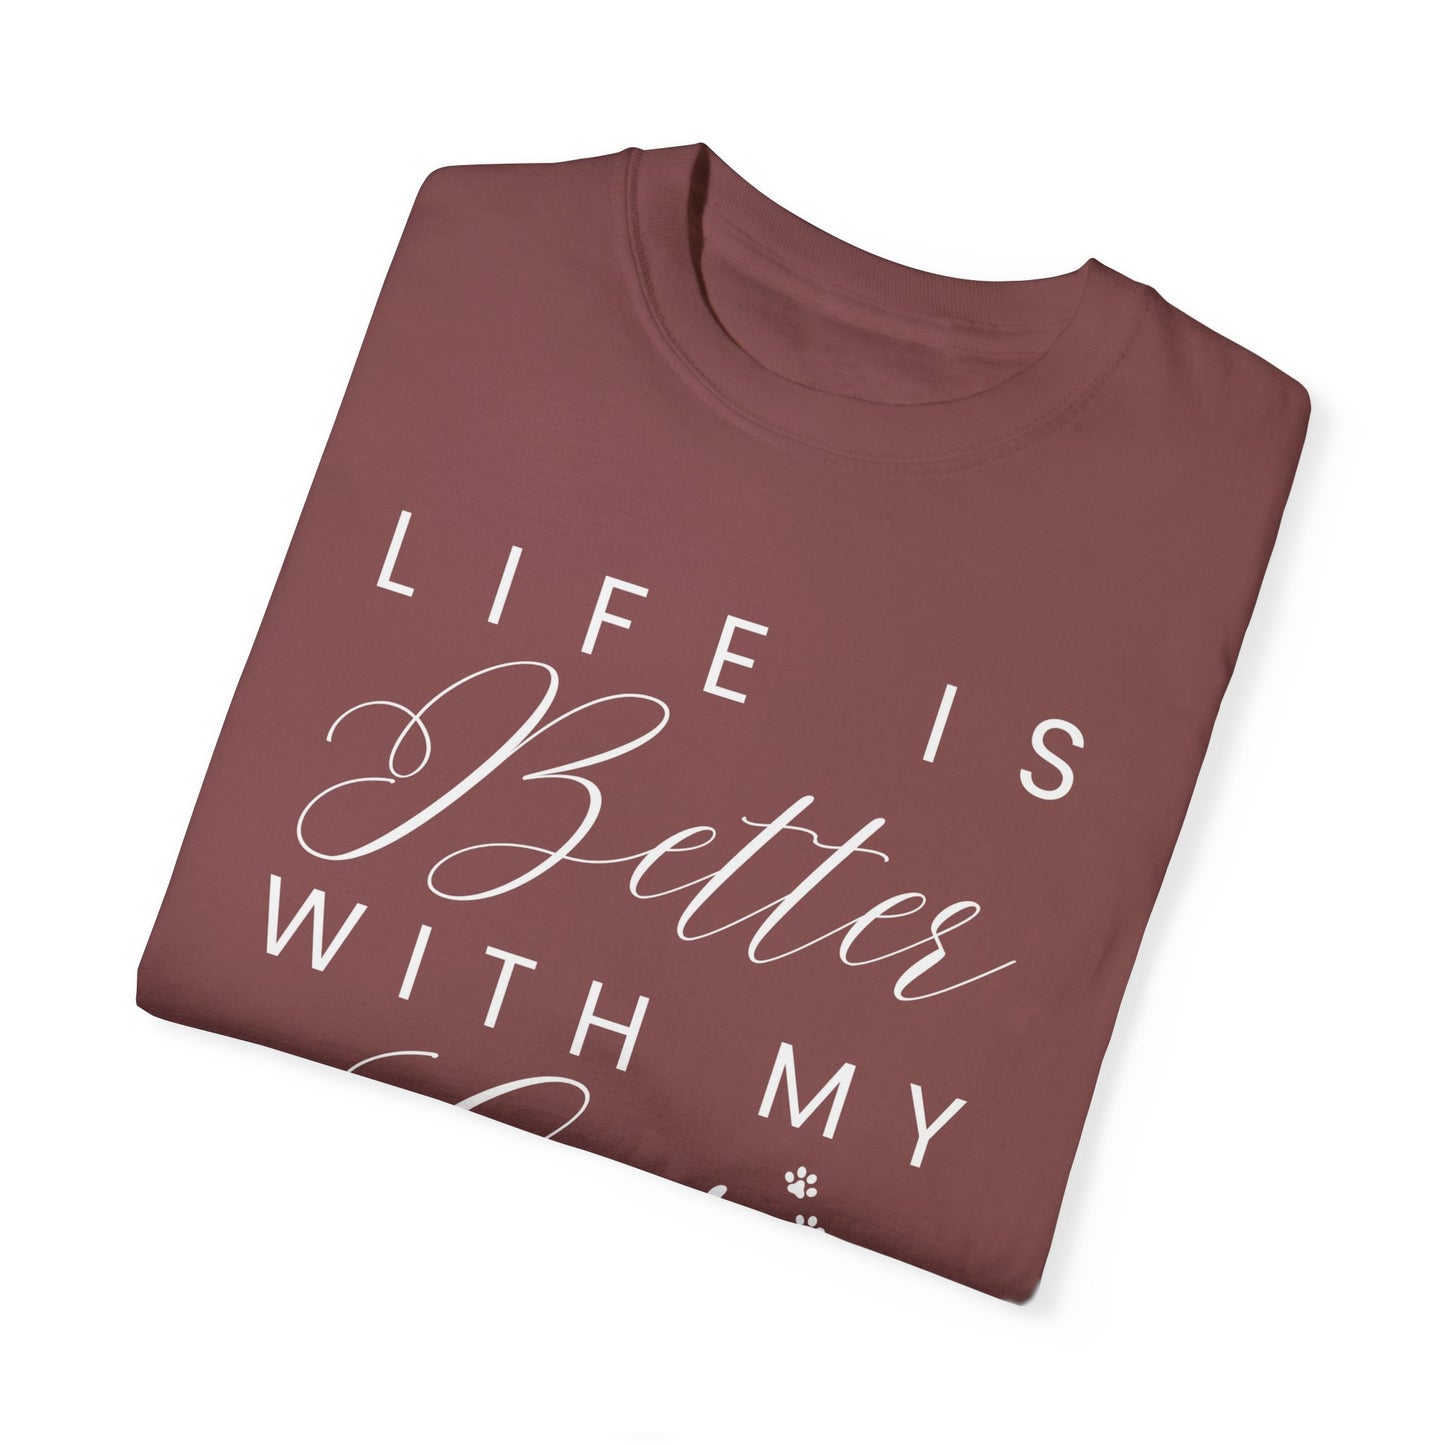 Women's Comfort Colors Tee - Life is Better with My Cats | Soft & Stylish Cat Lover Shirt for Ultimate Comfort | Trendy Short Sleeve Top for Feline Enthusiasts | Perfect Gift for Cat Moms | Sizes S-XXL